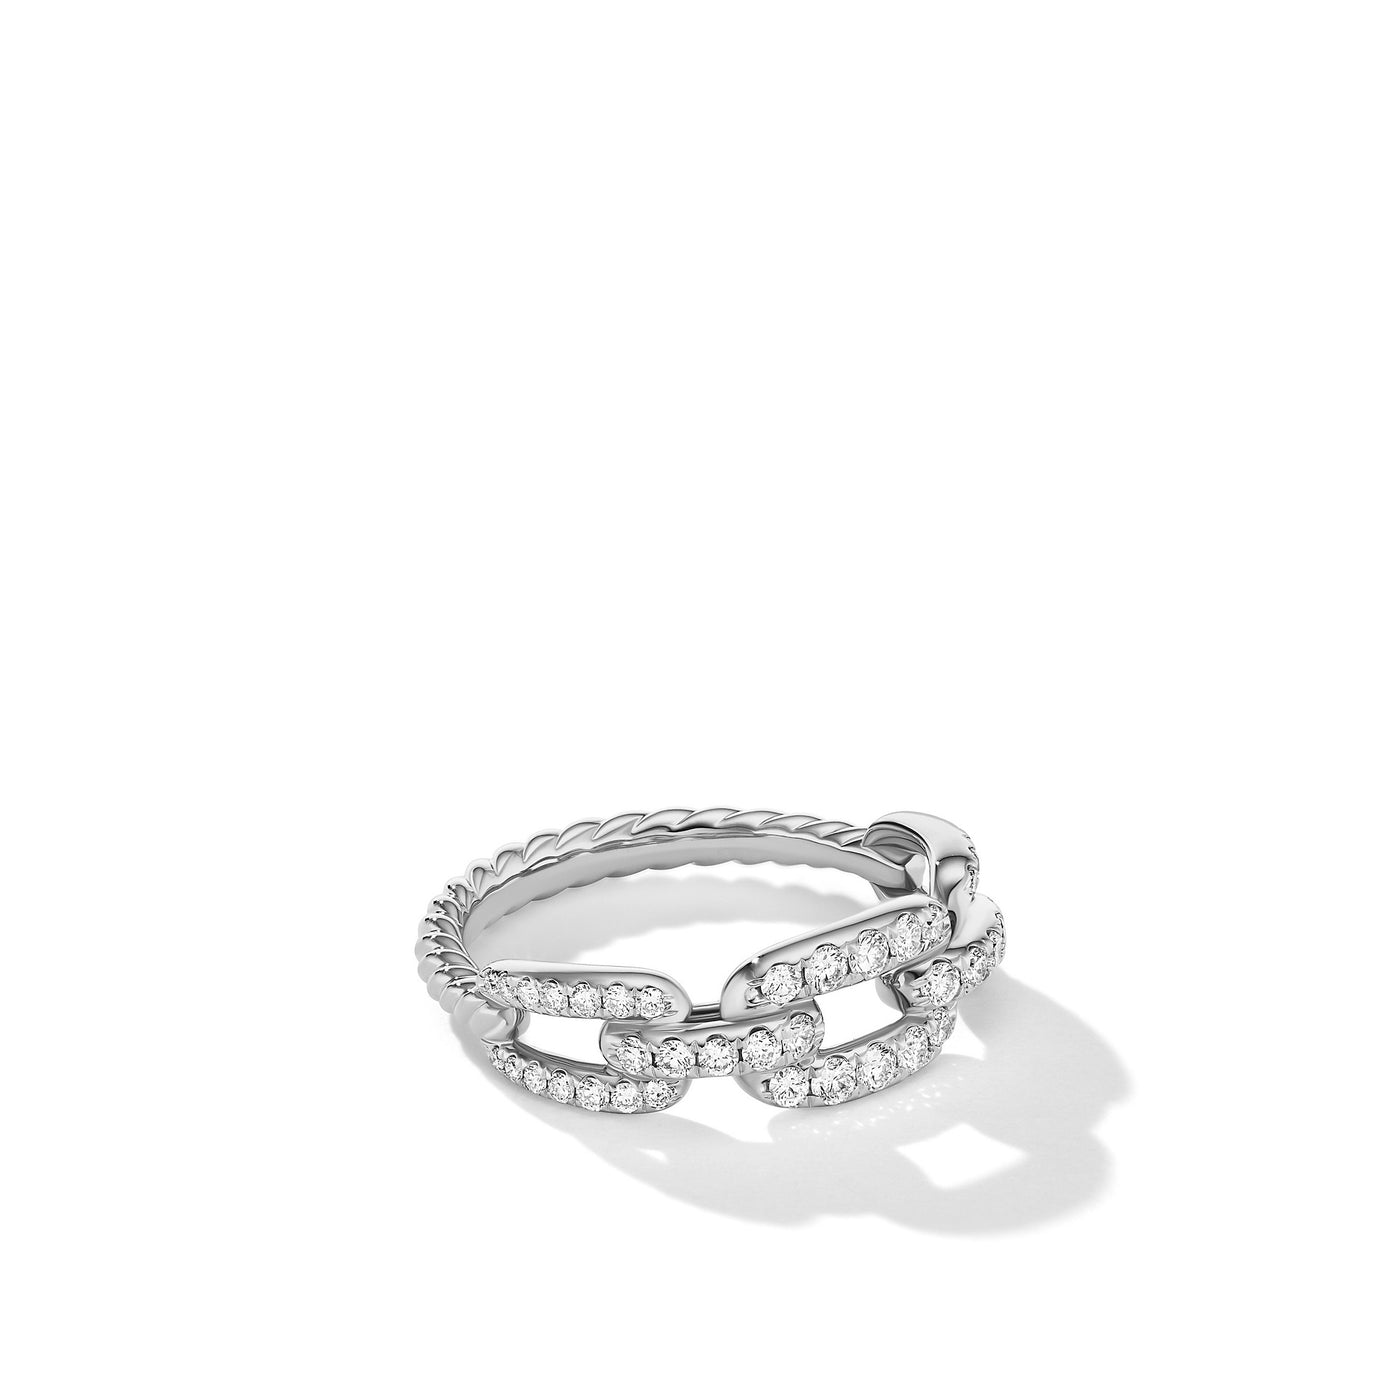 Stax Chain Link Ring in 18K White Gold with Diamonds\, 7mm